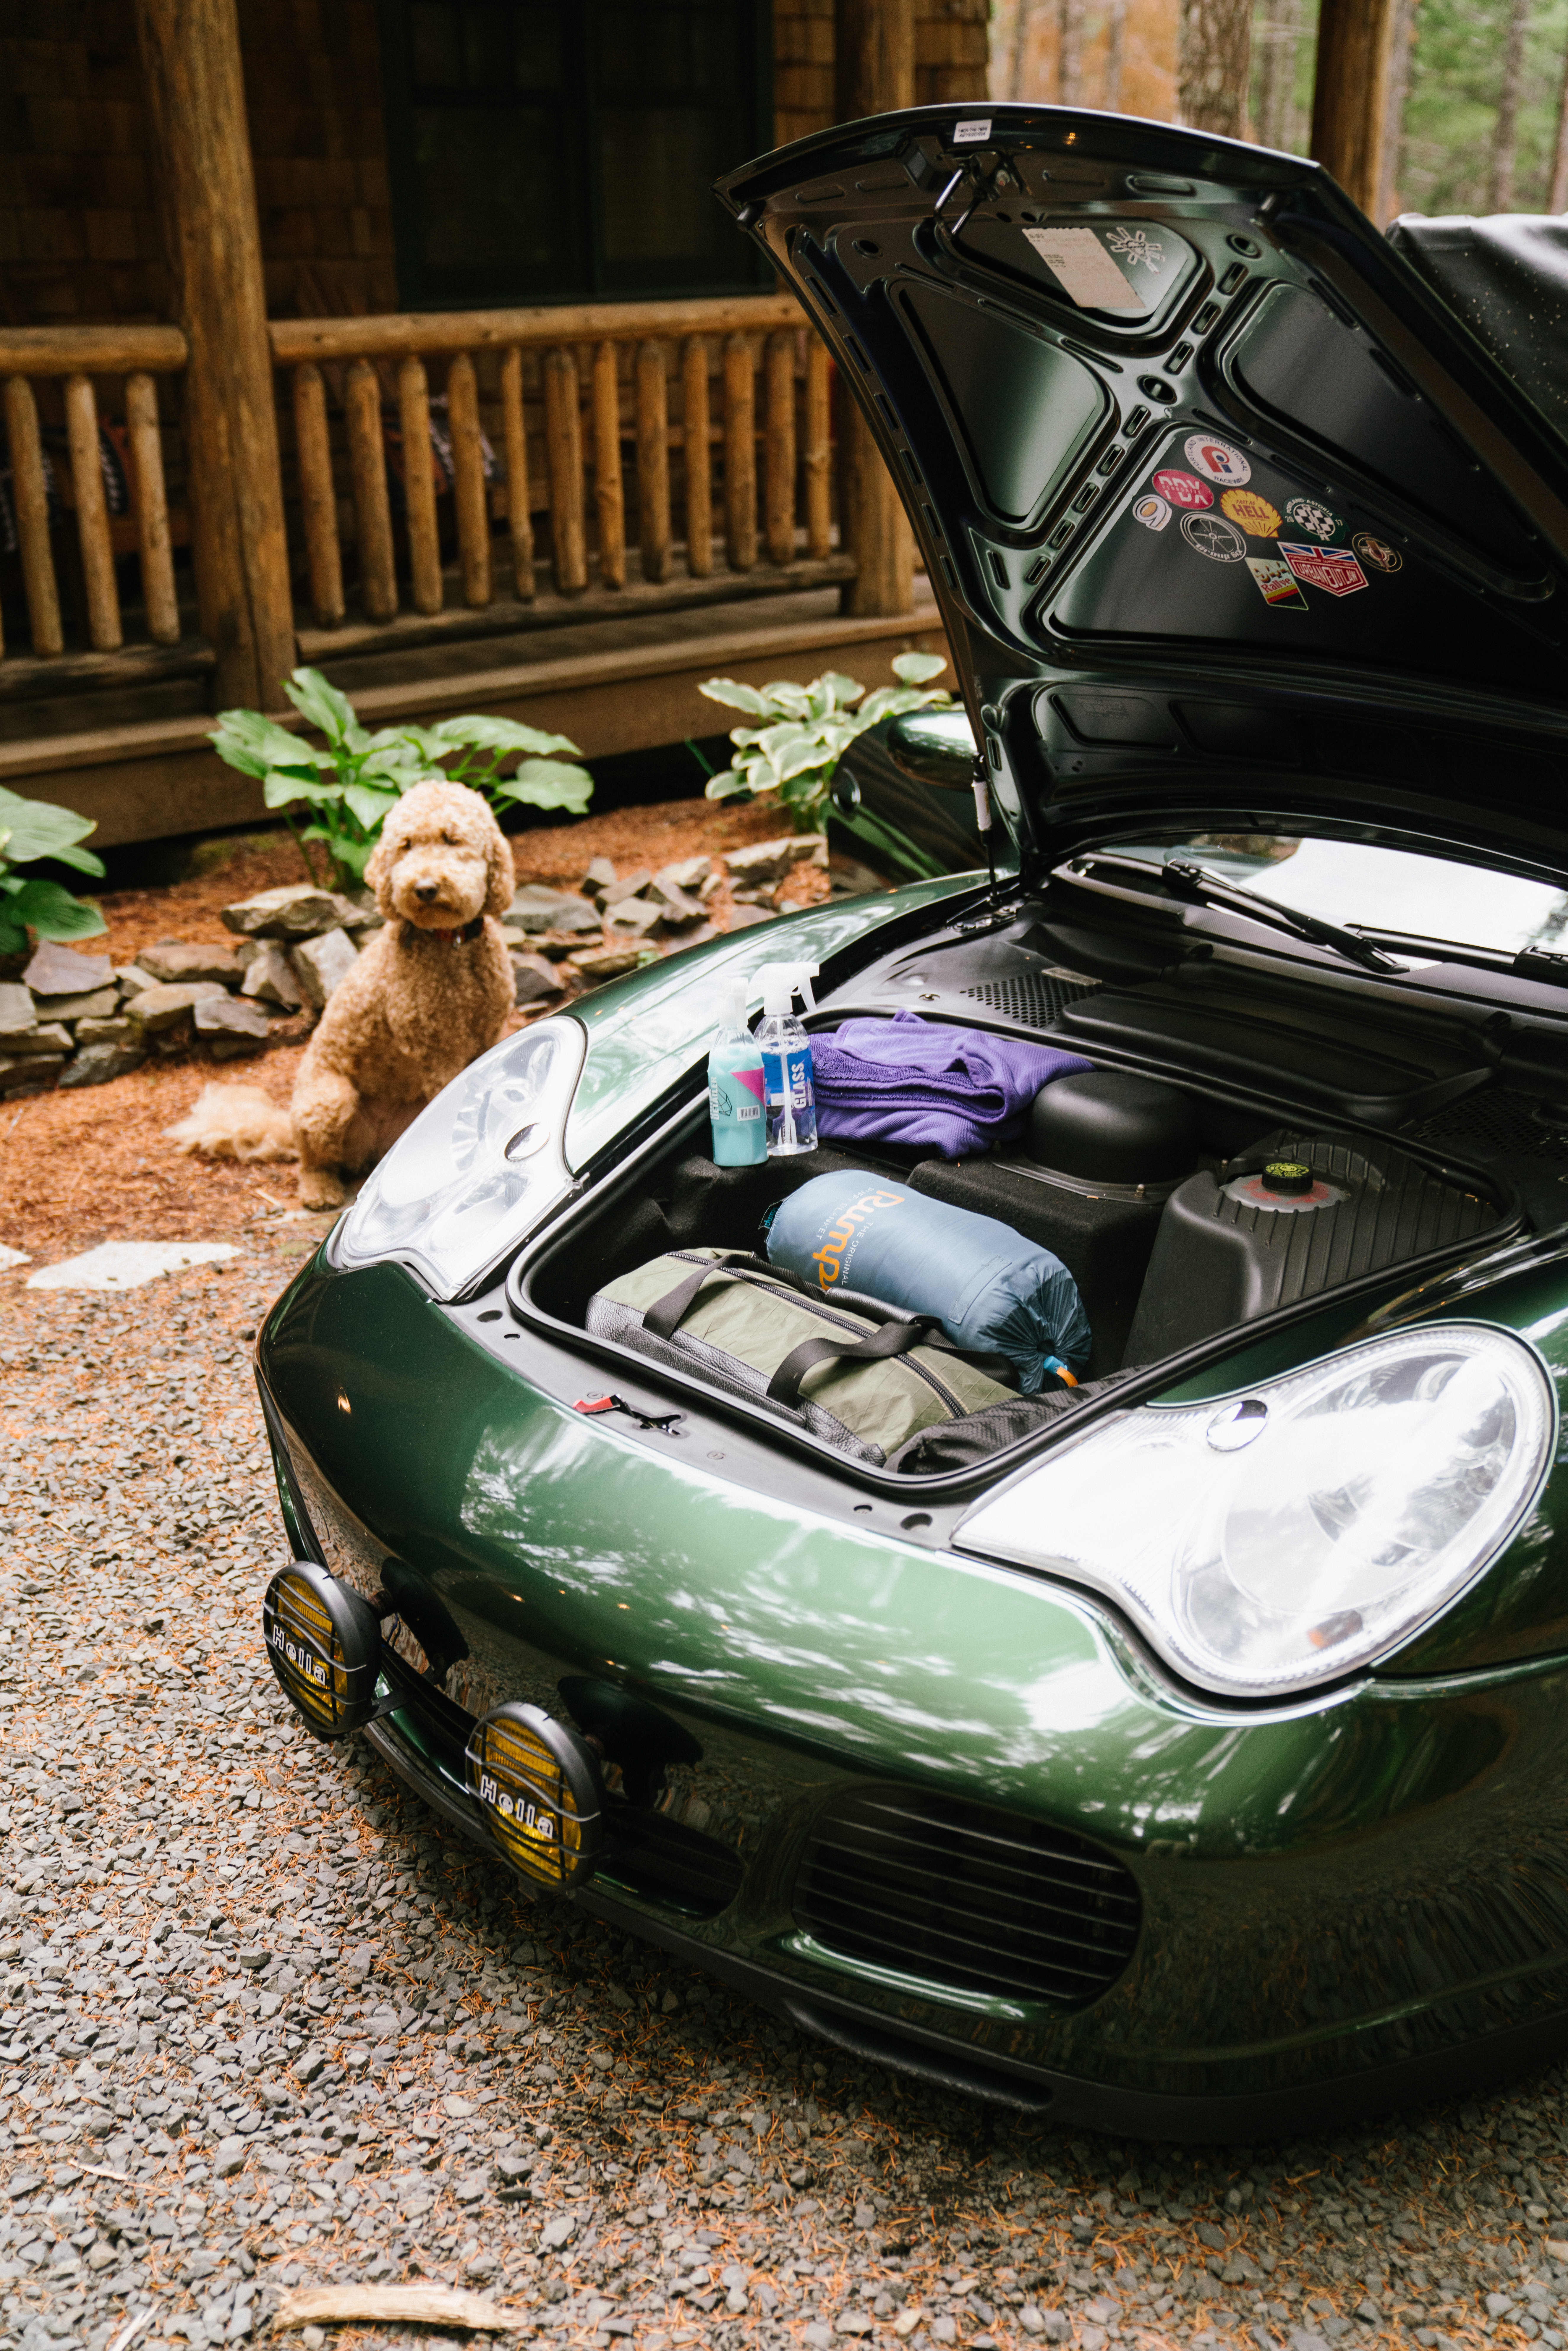 Frunk of Porsche 911 filled with camping gear. Goldendoodle sitting behind